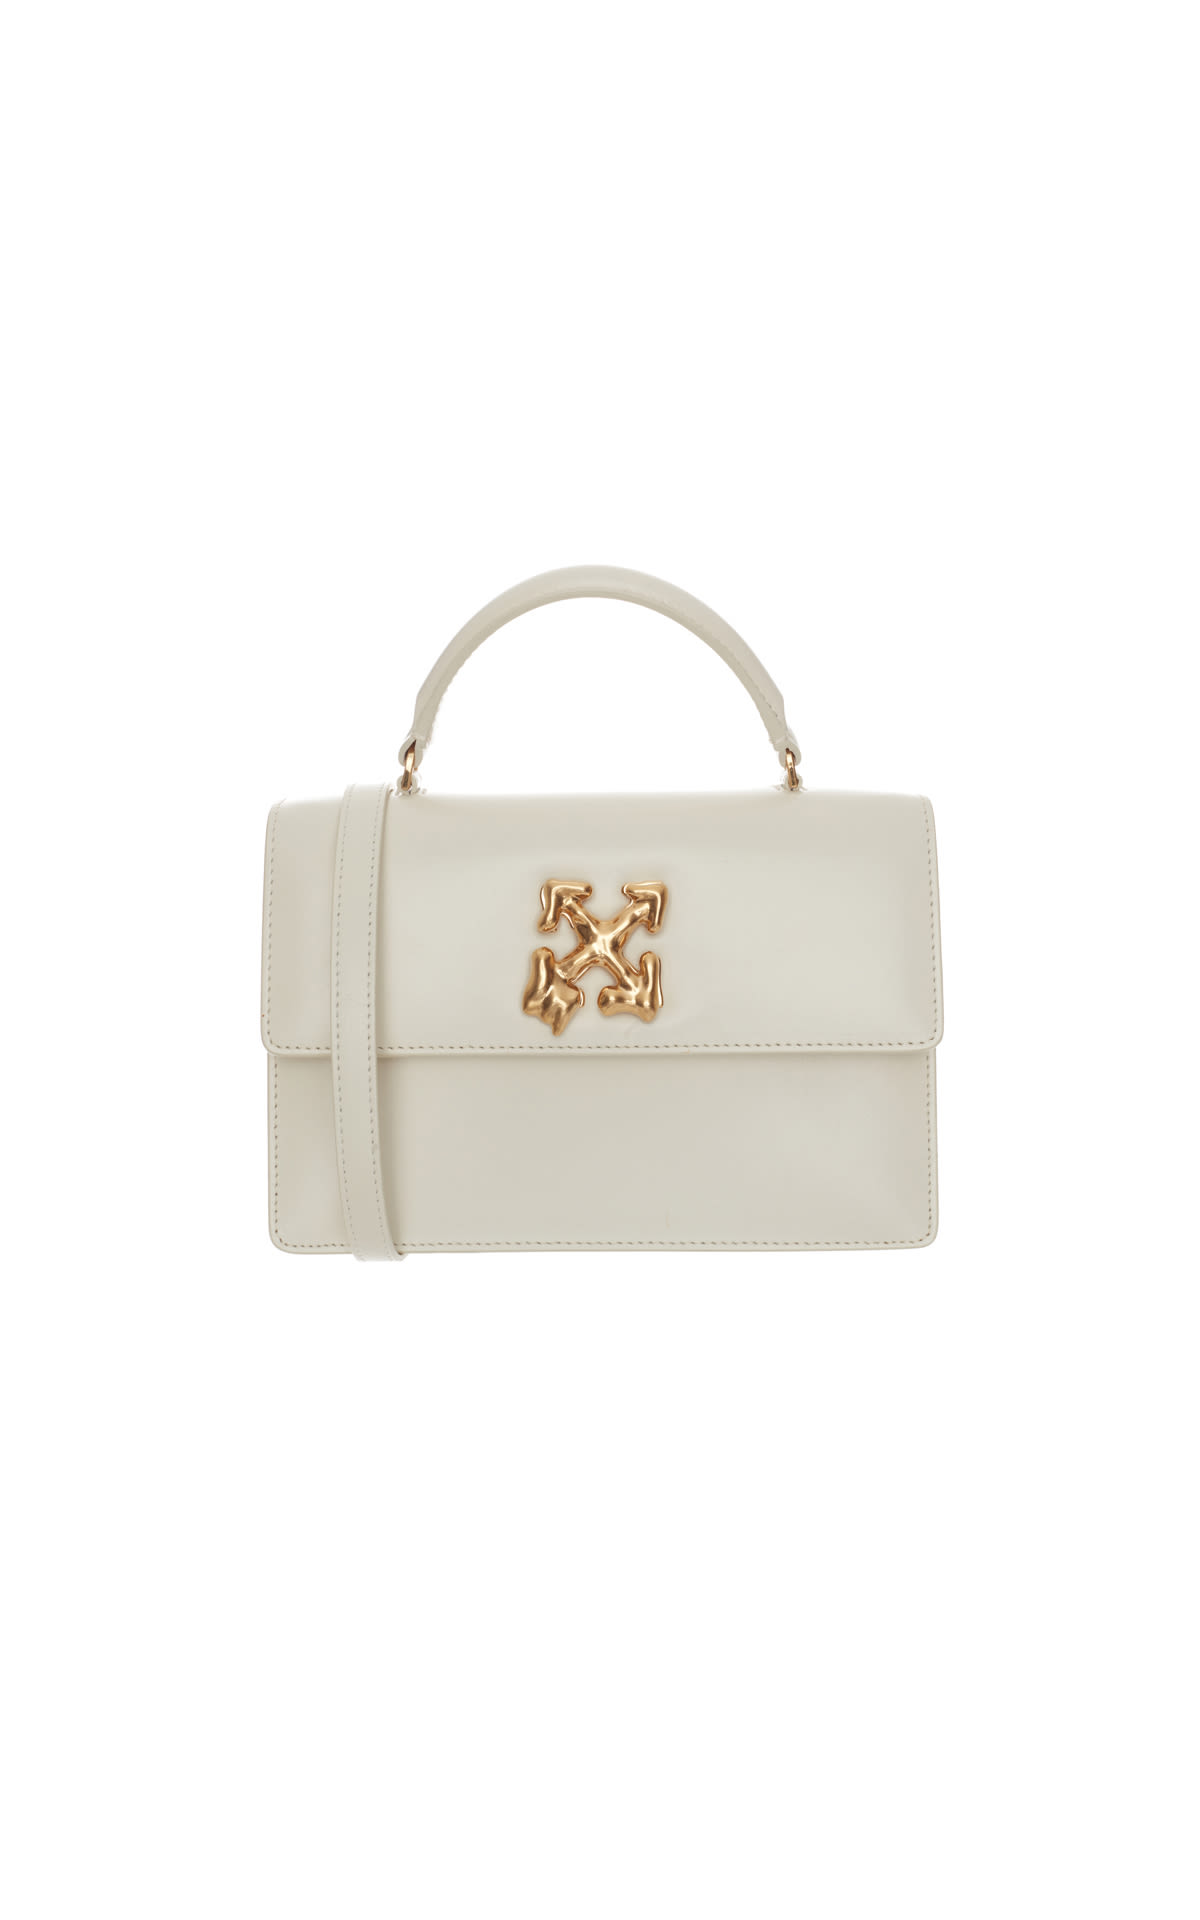 Off White Jitney top handle bag from Bicester Village